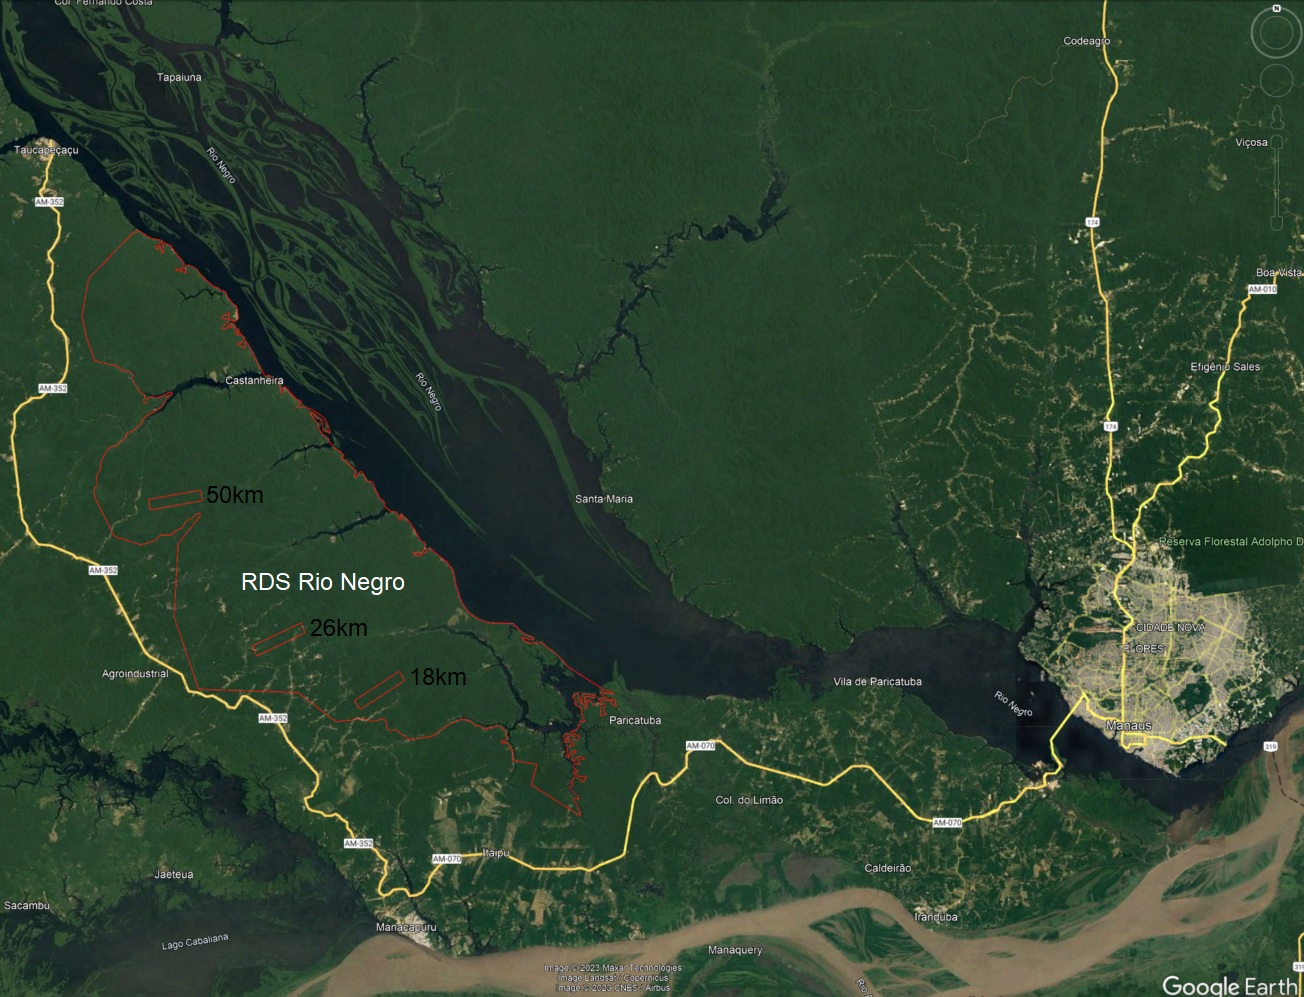 RDS Rio Negro and modules relative to Manaus.